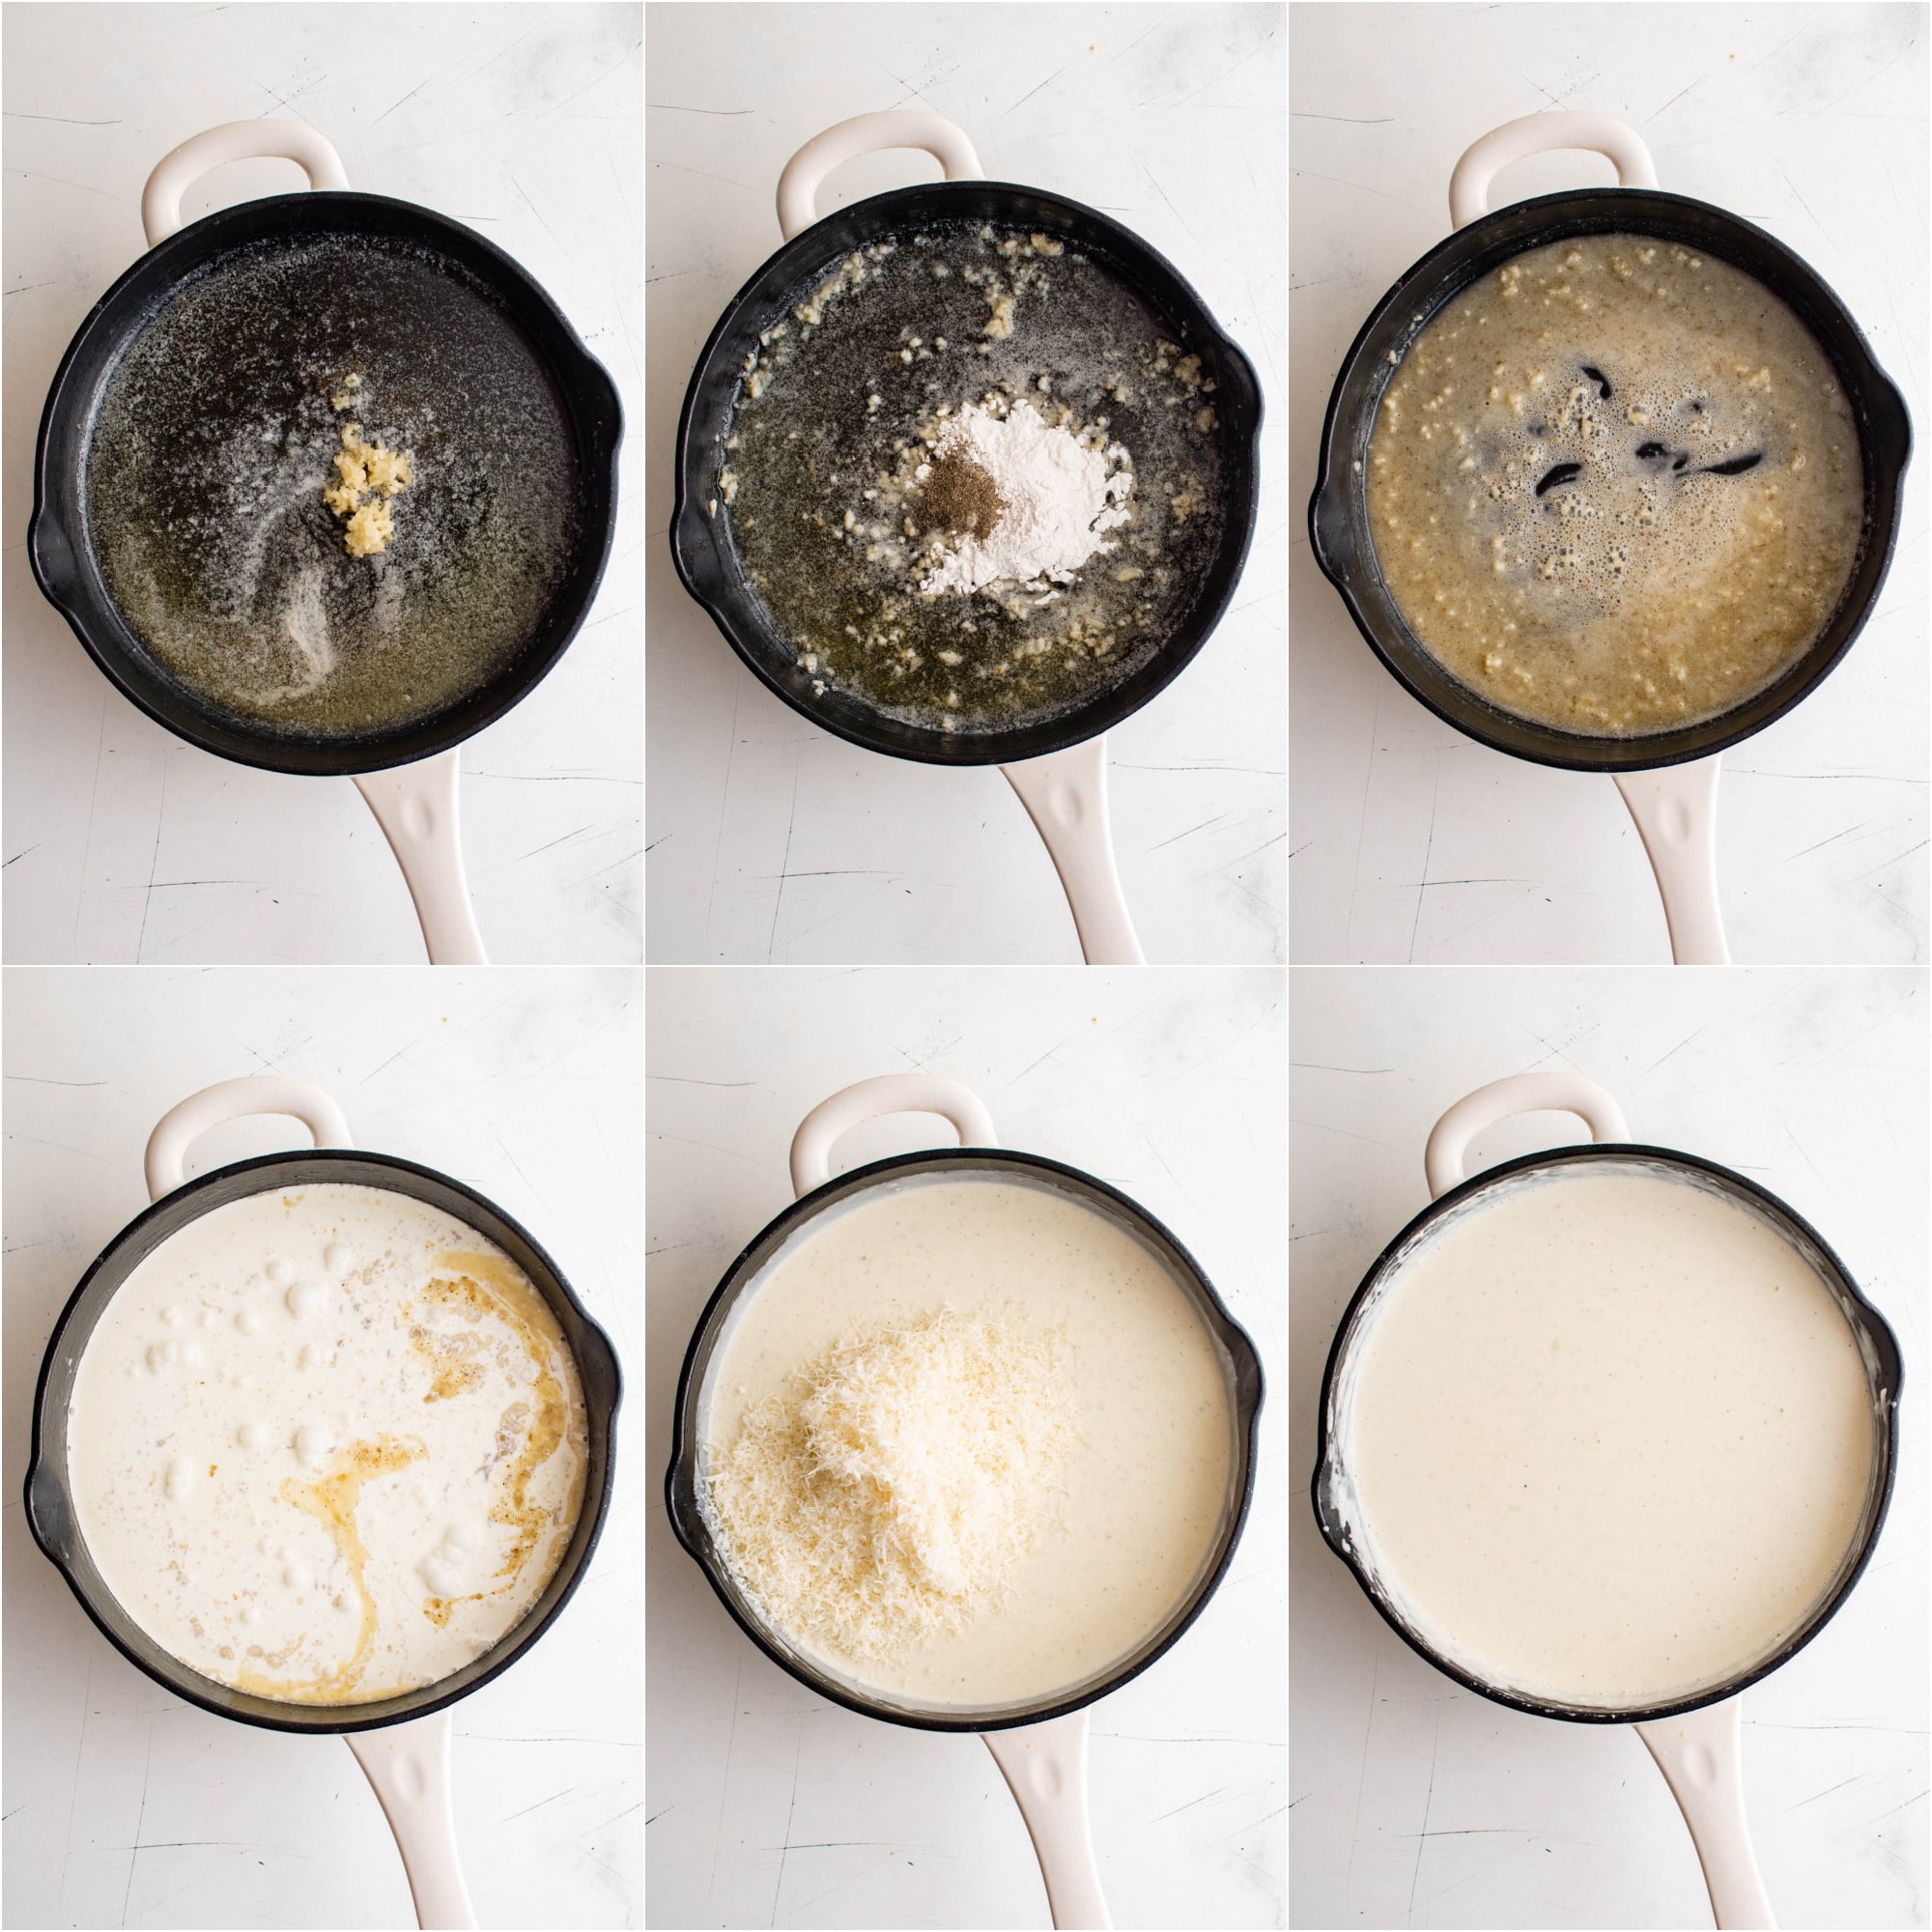 Six images in a collage: the first image shows melted butter and minced garlic in a large skillet; the second image shows flour added to a skillet with melted butter mixed with garlic; the third image shows melted butter and flour mixed together to make a roux; the fourth image shows heavy cream added to a large skillet; the fifth image shows grated parmesan cheese added to a large skillet with simmering alfredo sauce; the sixth image shows fully prepared and simmering homemade alfredo sauce in a stainless steel skillet.